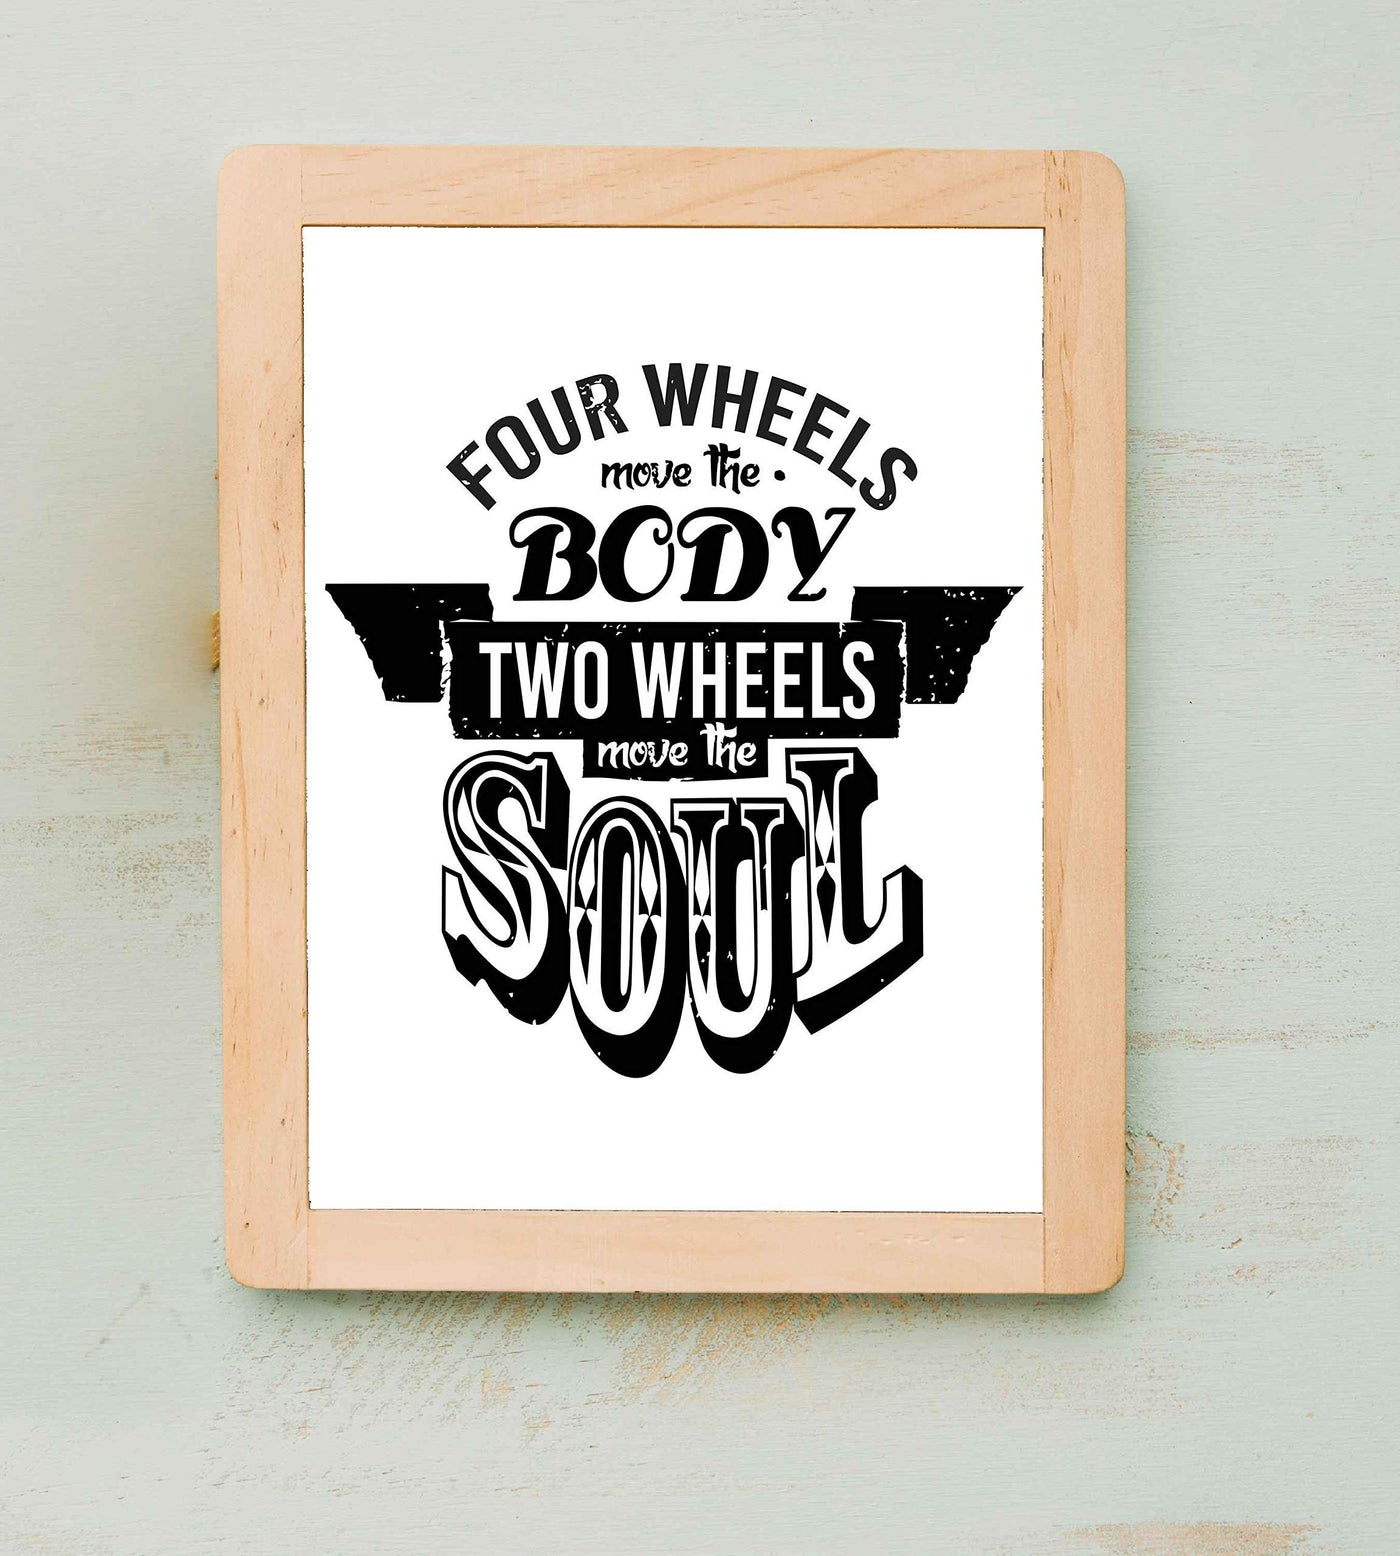 Four Wheels Move the Body-Two Move the Soul- Funny Motorcycle Sign. 8 x 10" Retro Wall Art Print-Ready To Frame. Home-Office Decor. Perfect for Man Cave-Bar-Garage! Great Gift for Motorcyclists!